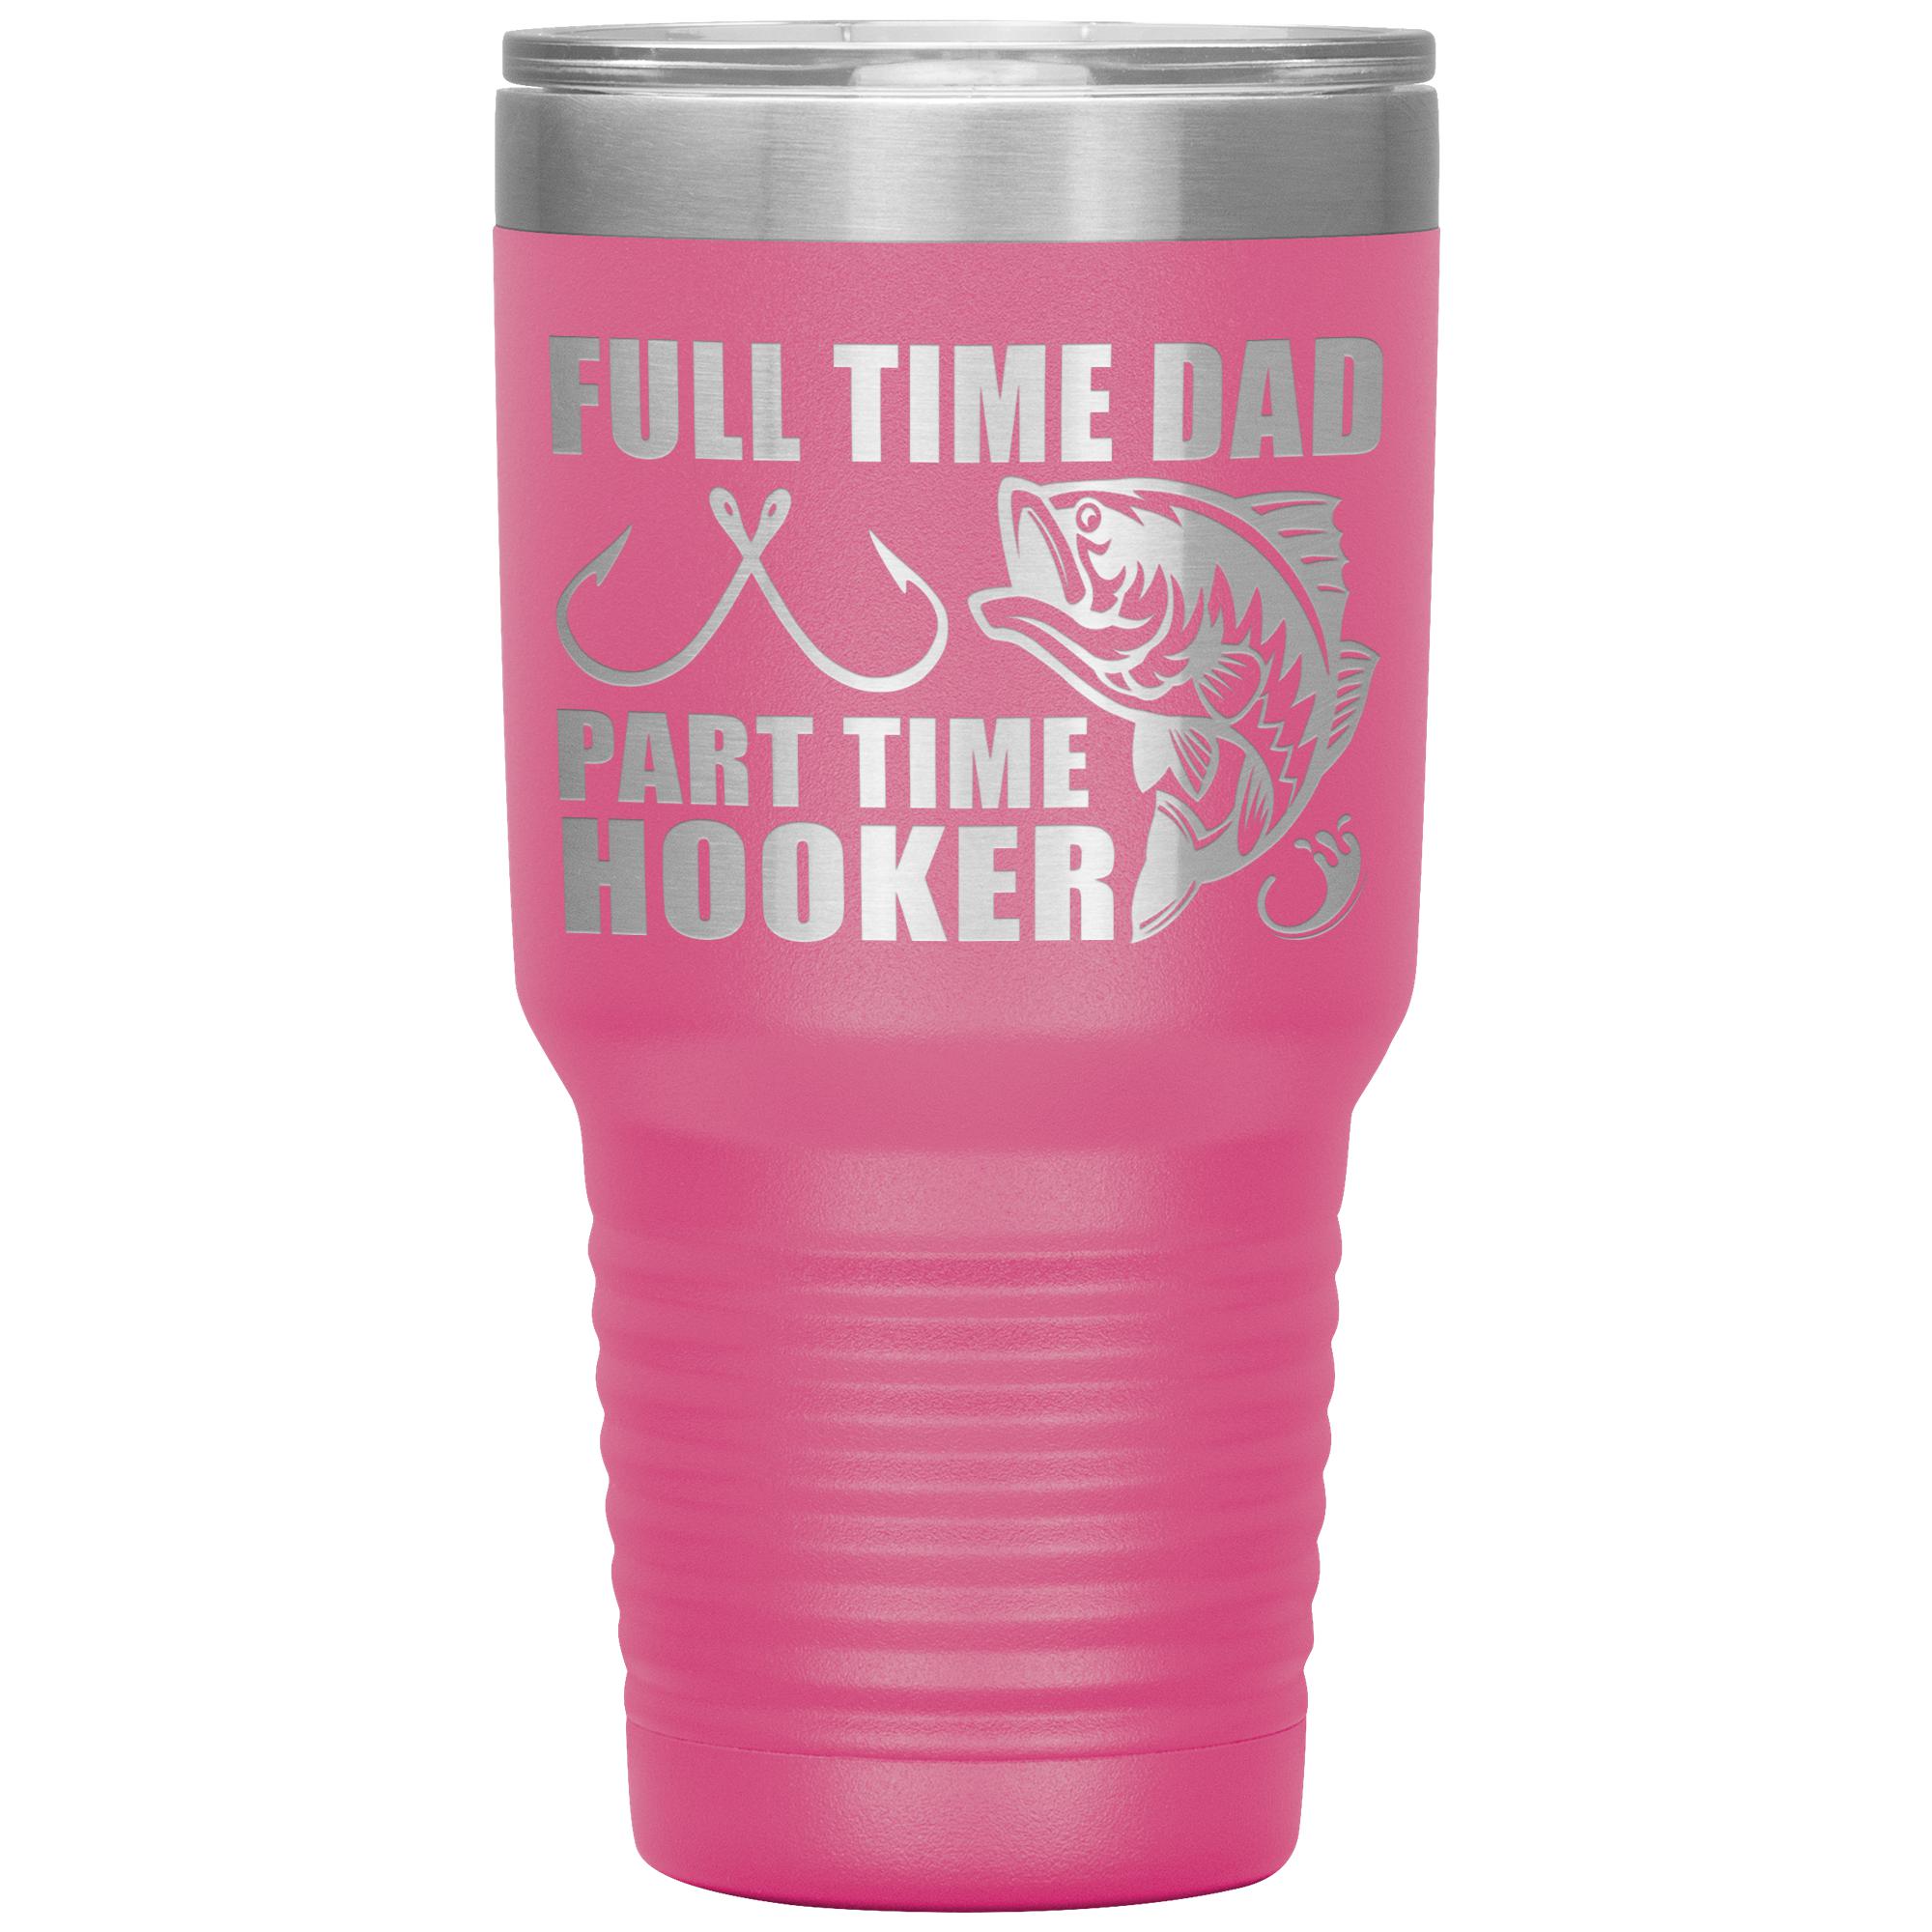 Full Time Dad Part Time Hooker Funny Fishing Dad Tumblers – That's